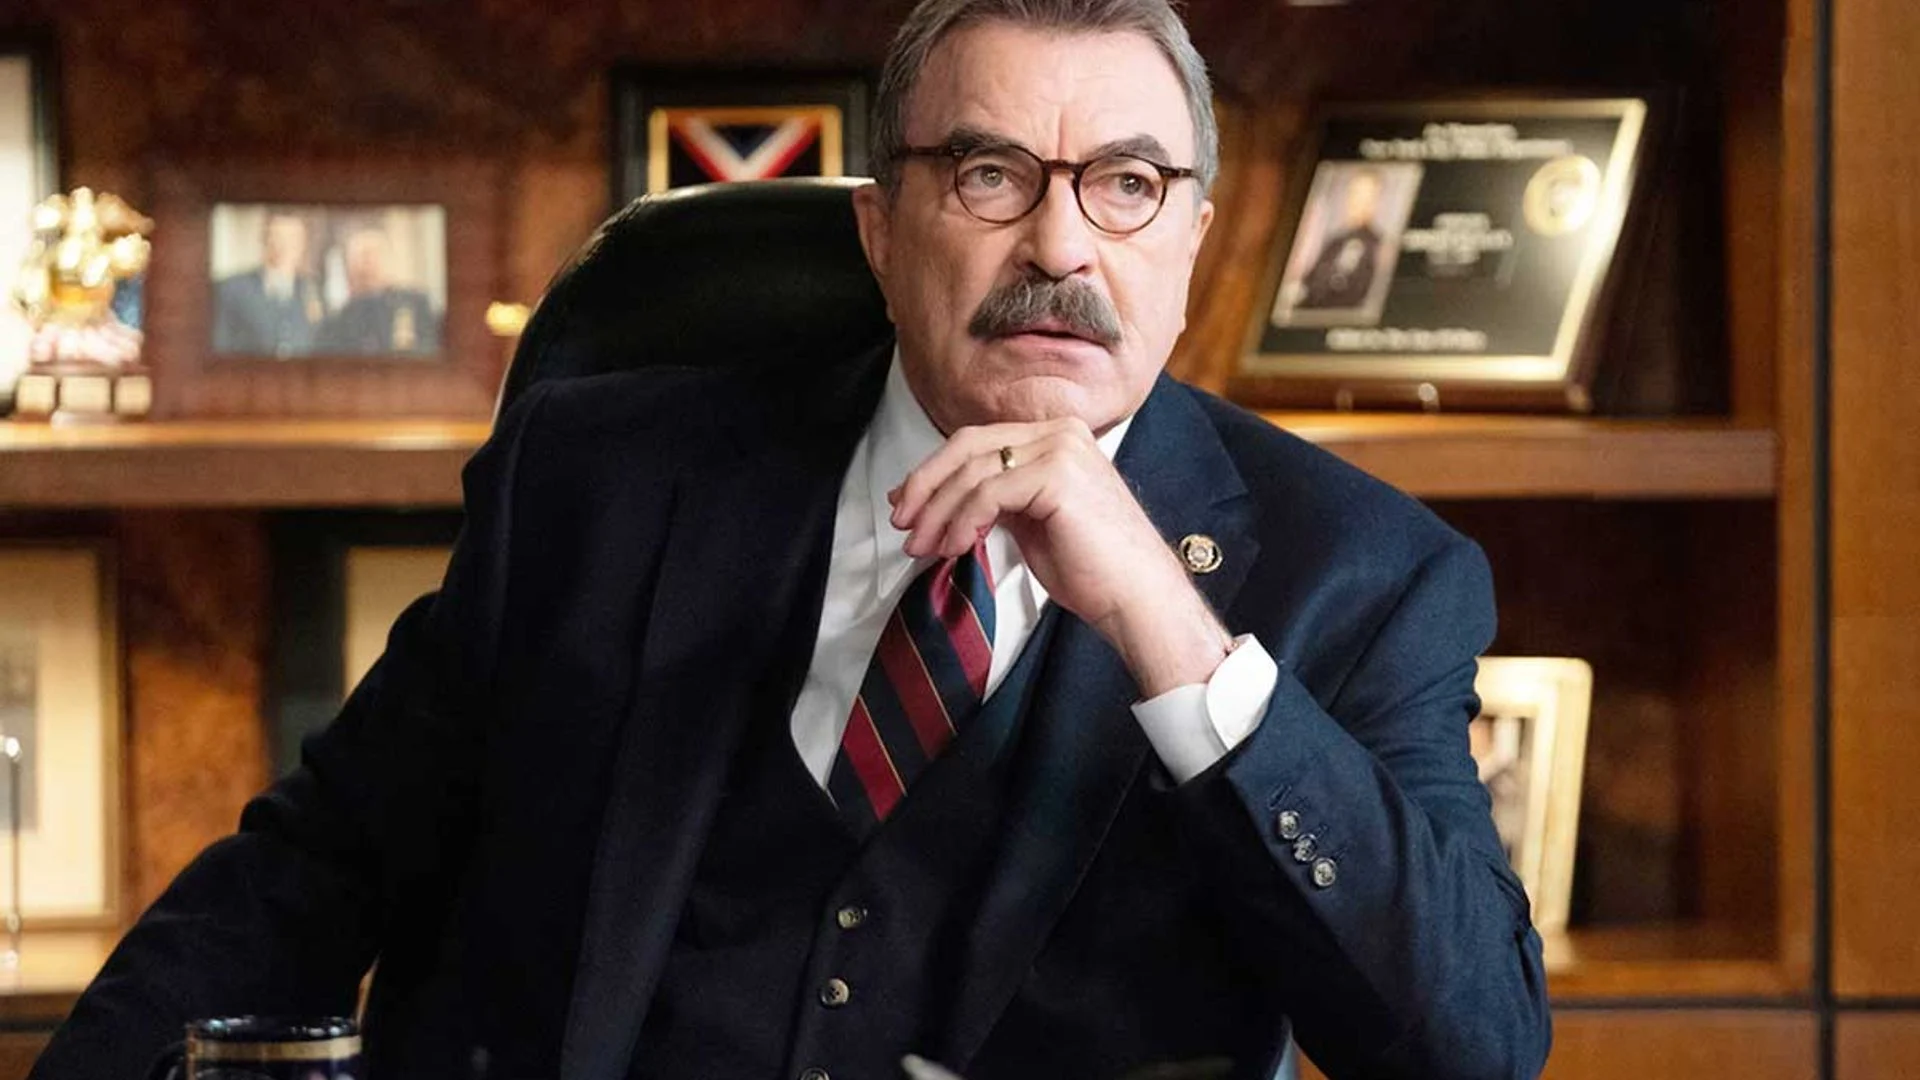 Tom Selleck Fights to Save 'Blue Bloods' as Fans Rally Against CBS's Shocking Cancellation